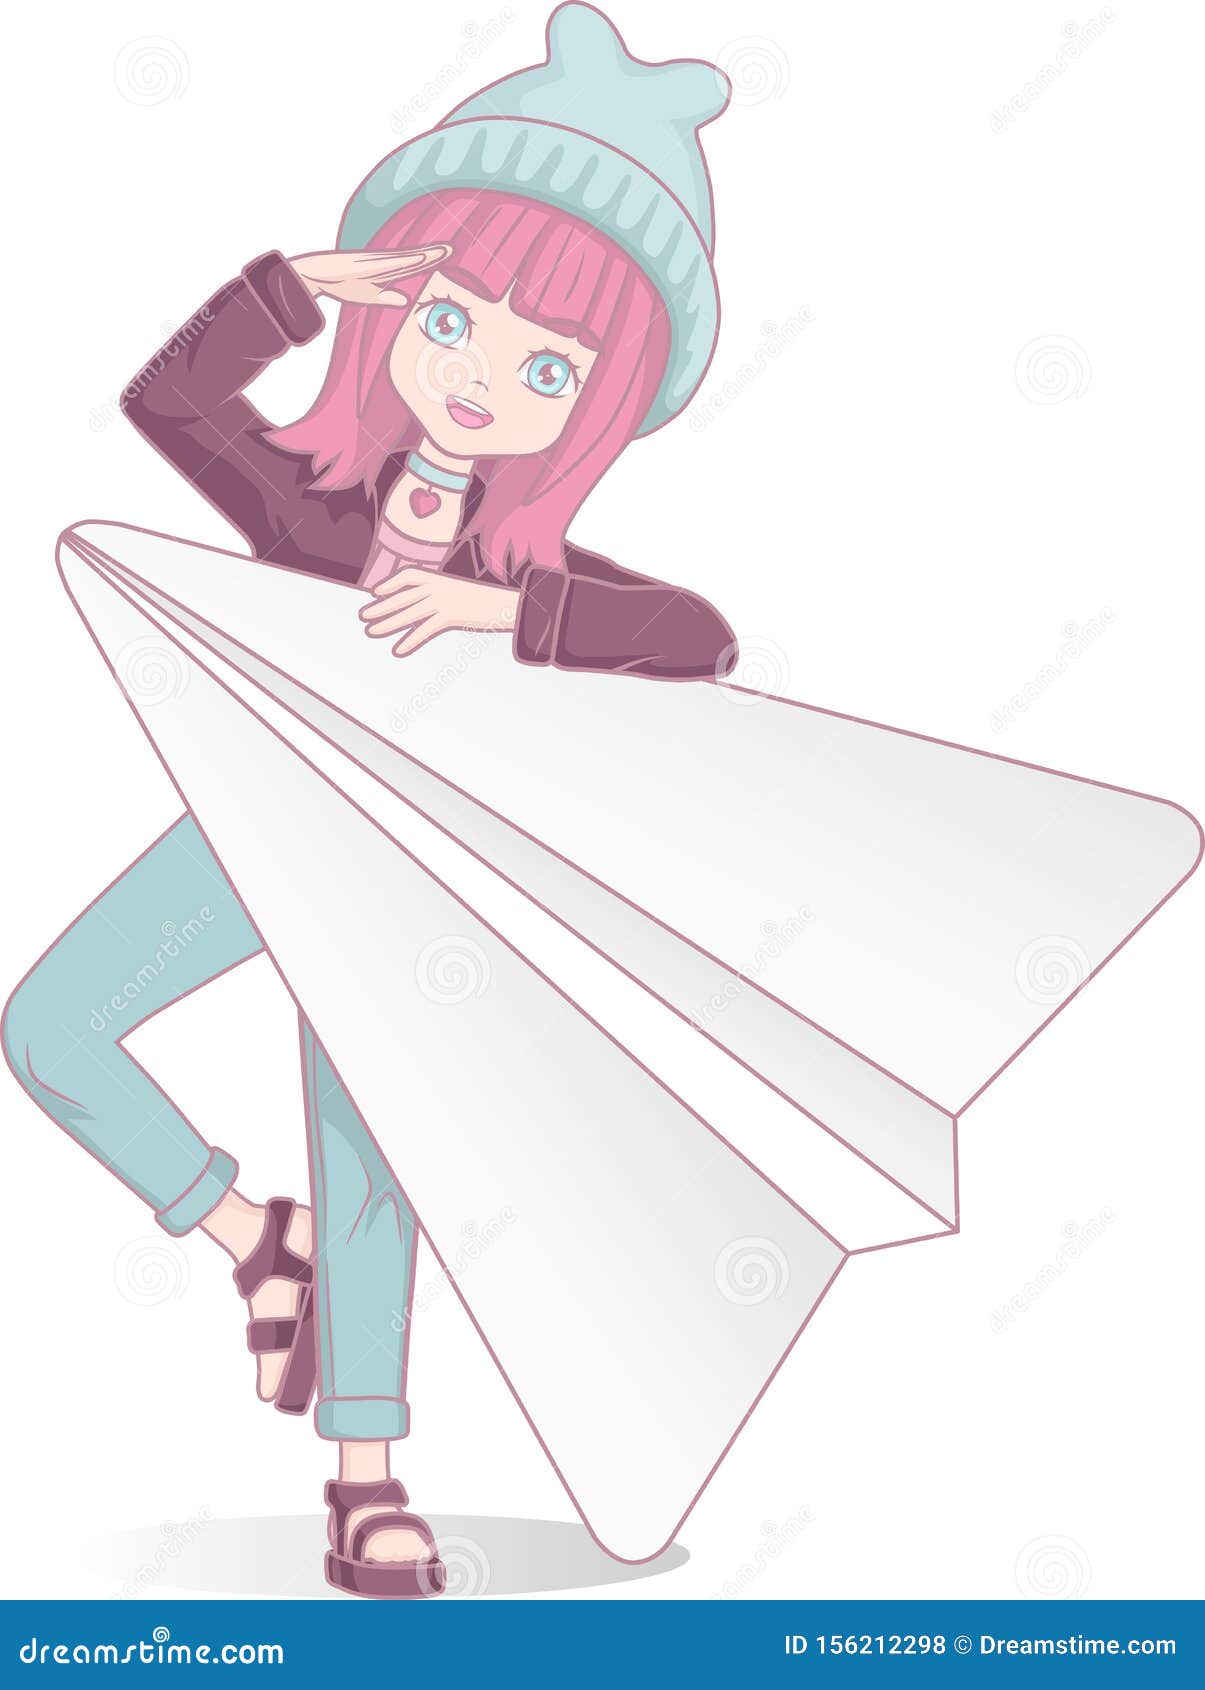 Anime Manga Girl with Paper Plane. Cartoon Character in Japanese Style.  Messenger. Stock Vector - Illustration of cartoon, japan: 156212298